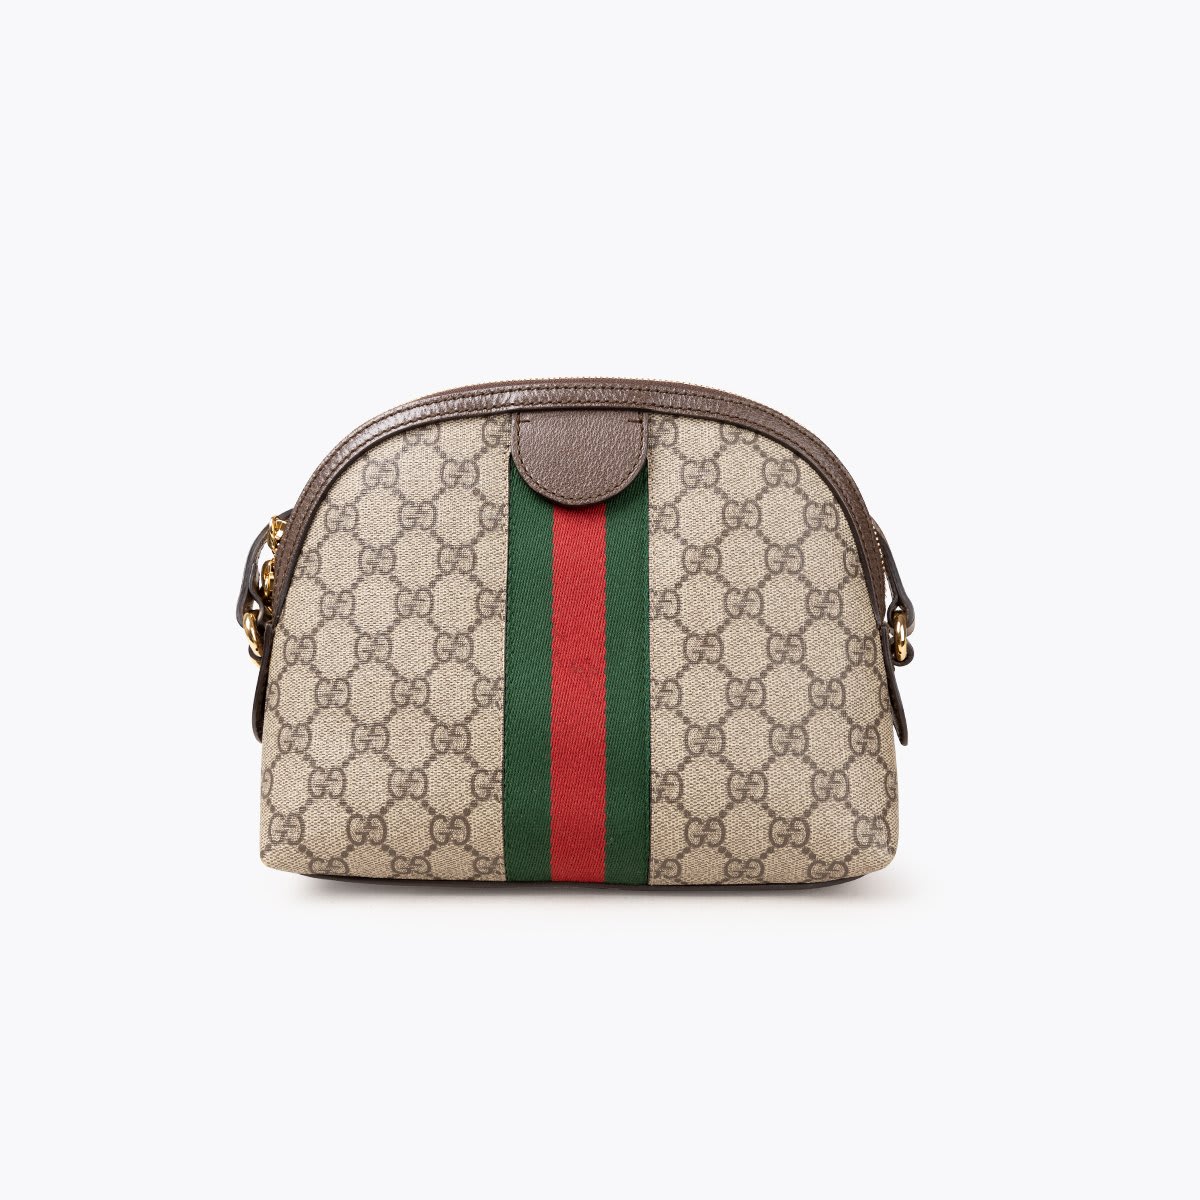 Gucci Ophidia Dome Bag